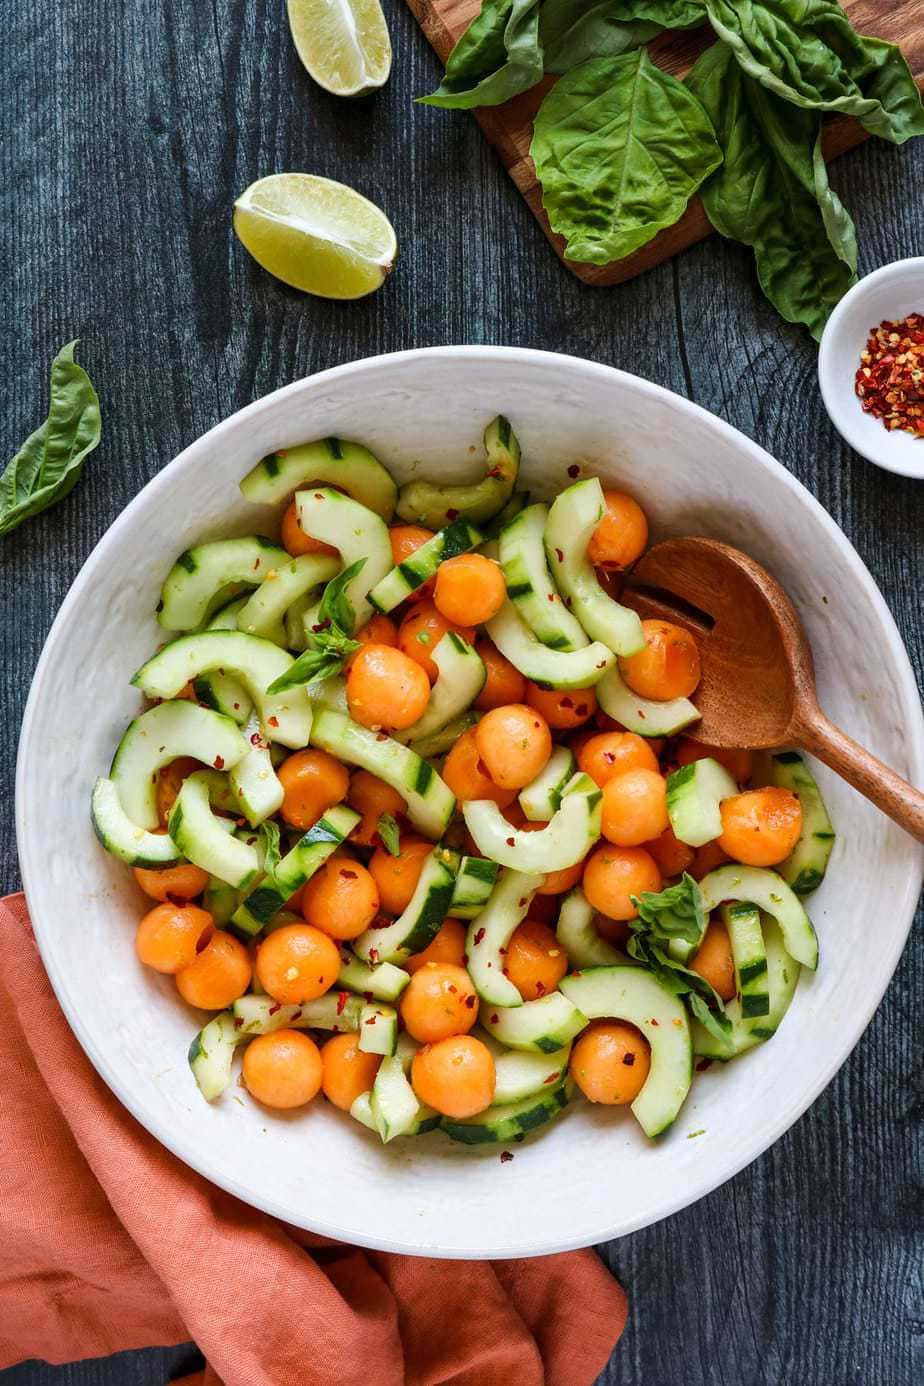 Cucumber and Melon Salad with Basil